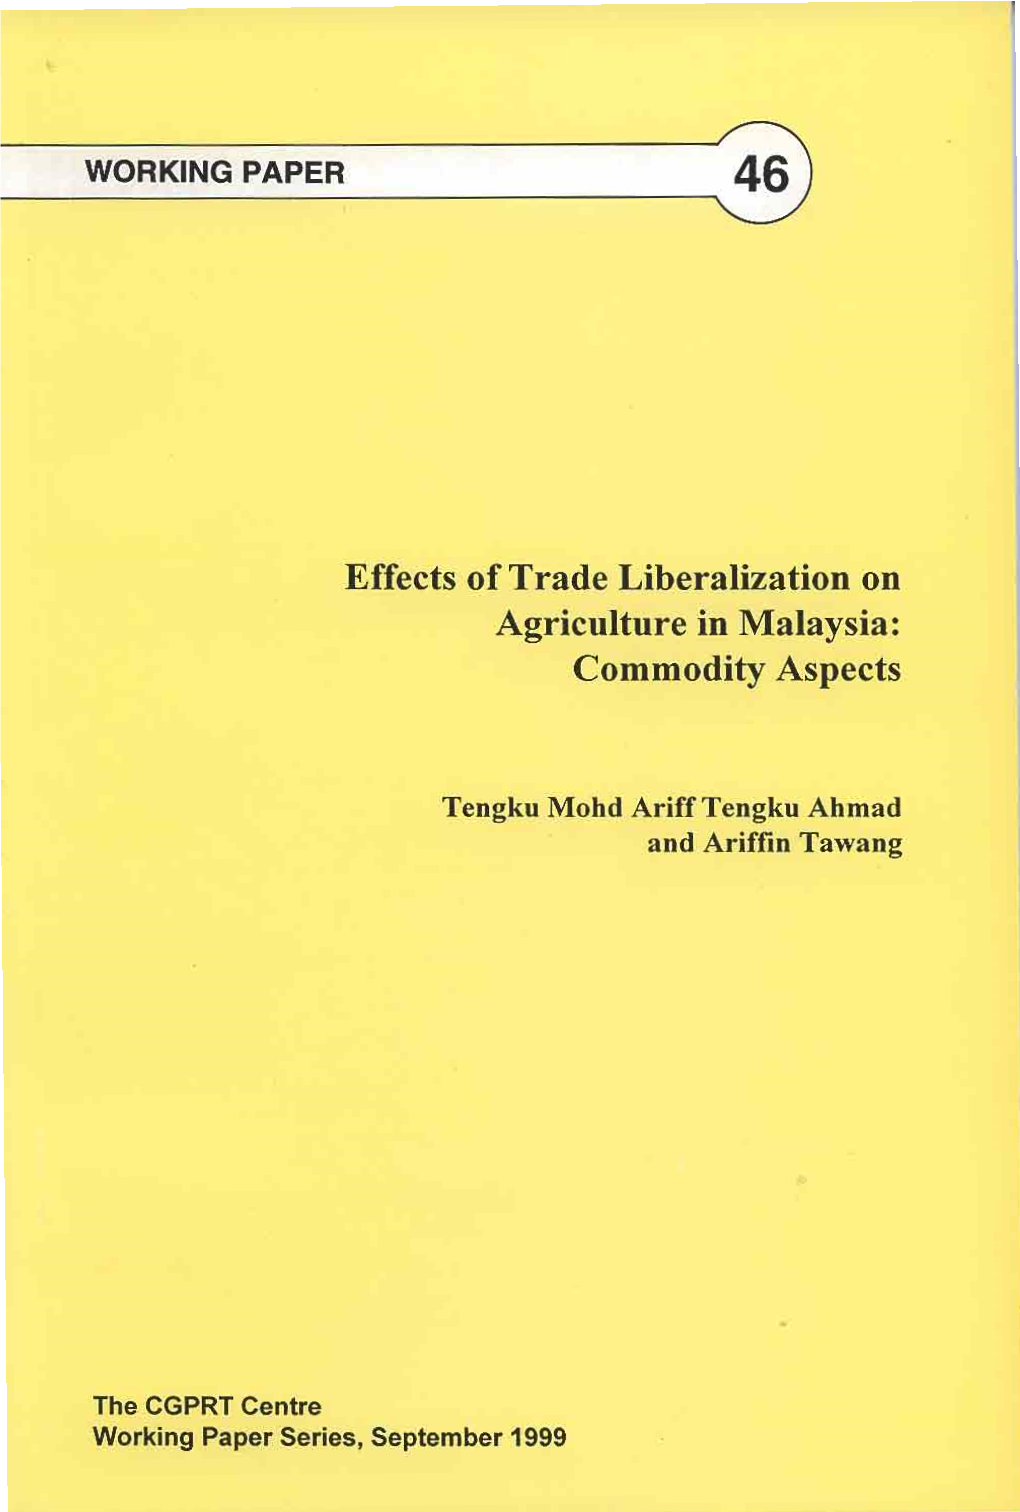 Effects of Trade Liberalization on Agriculture in Malaysia: Institutional and Structural Aspects by Tengku Mohd Ariff Tengku Ahmad